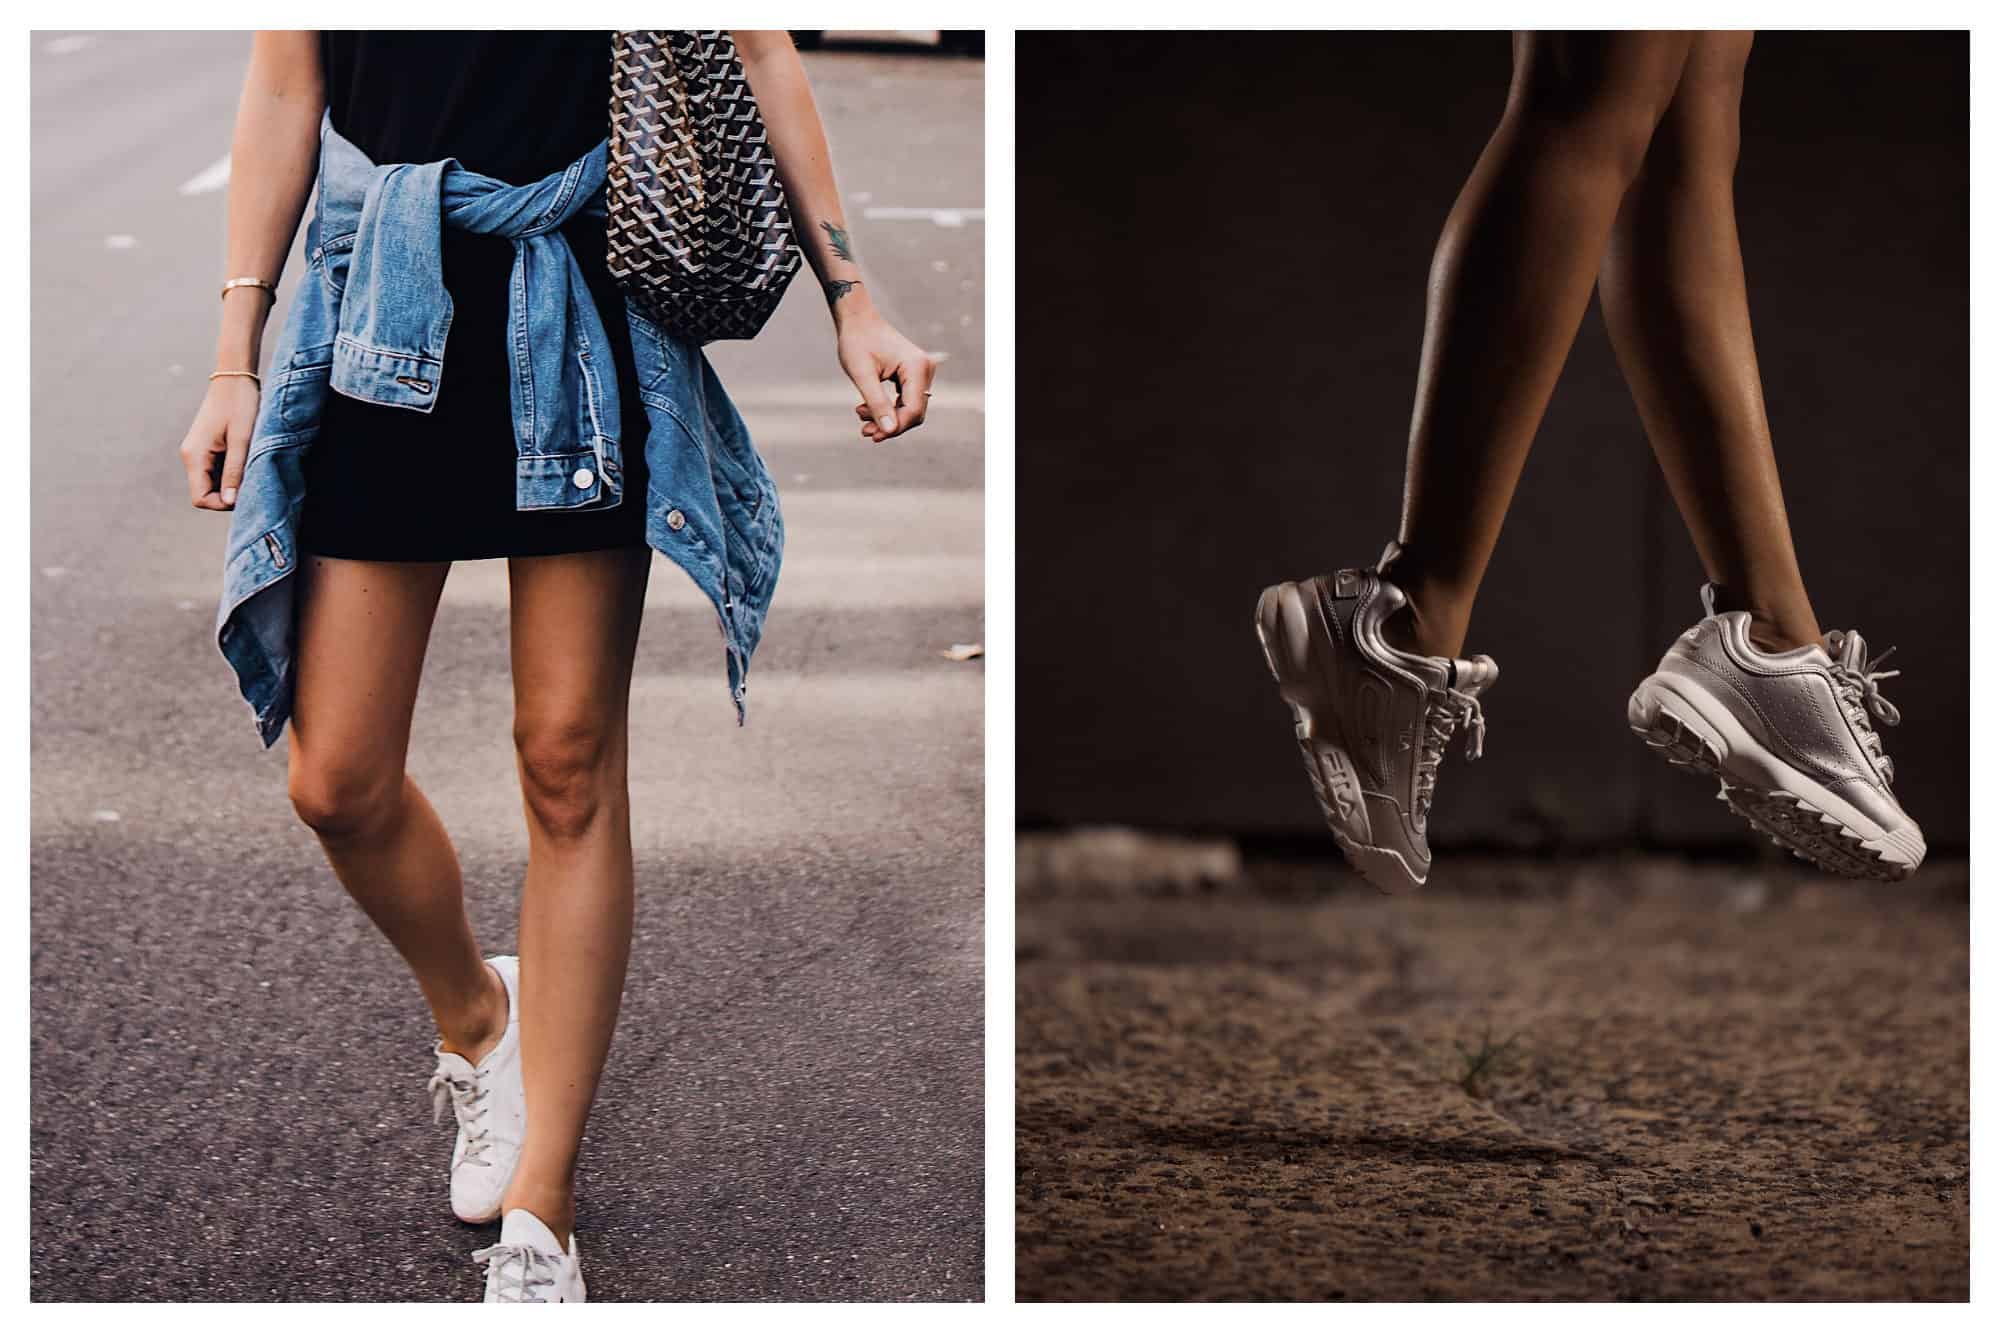 A woman in summer wearing a Goyard bag in Paris (left). A woman jumping up, only her legs and white 'dad shoe' trainers are visible (right).